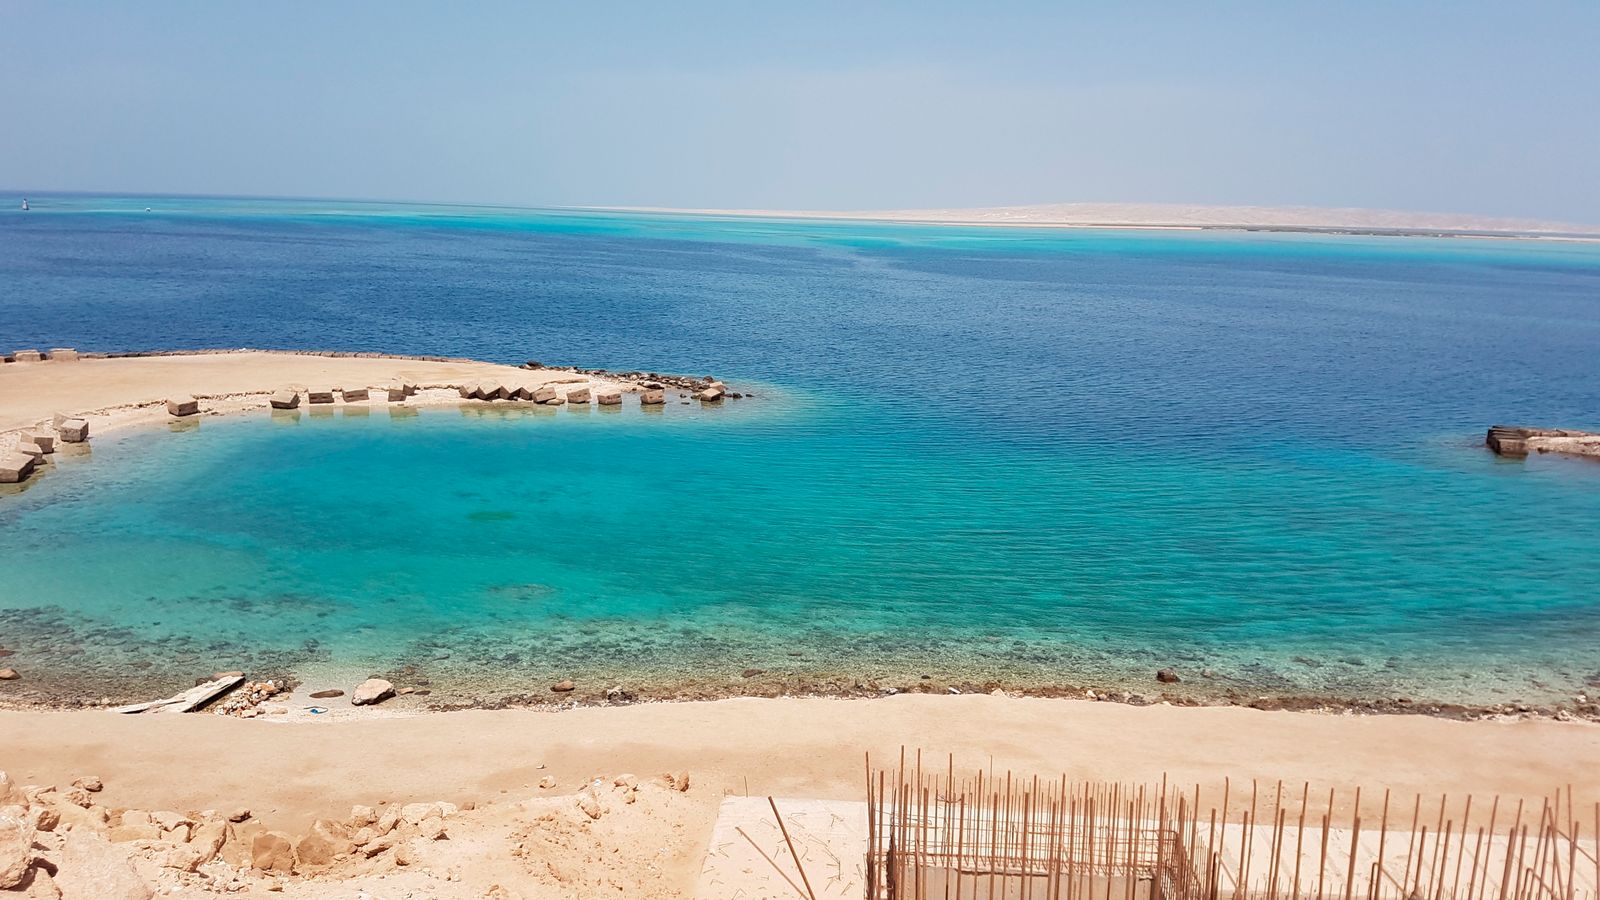 Part of Egypt's Red Sea coast closed after woman killed in shark attack